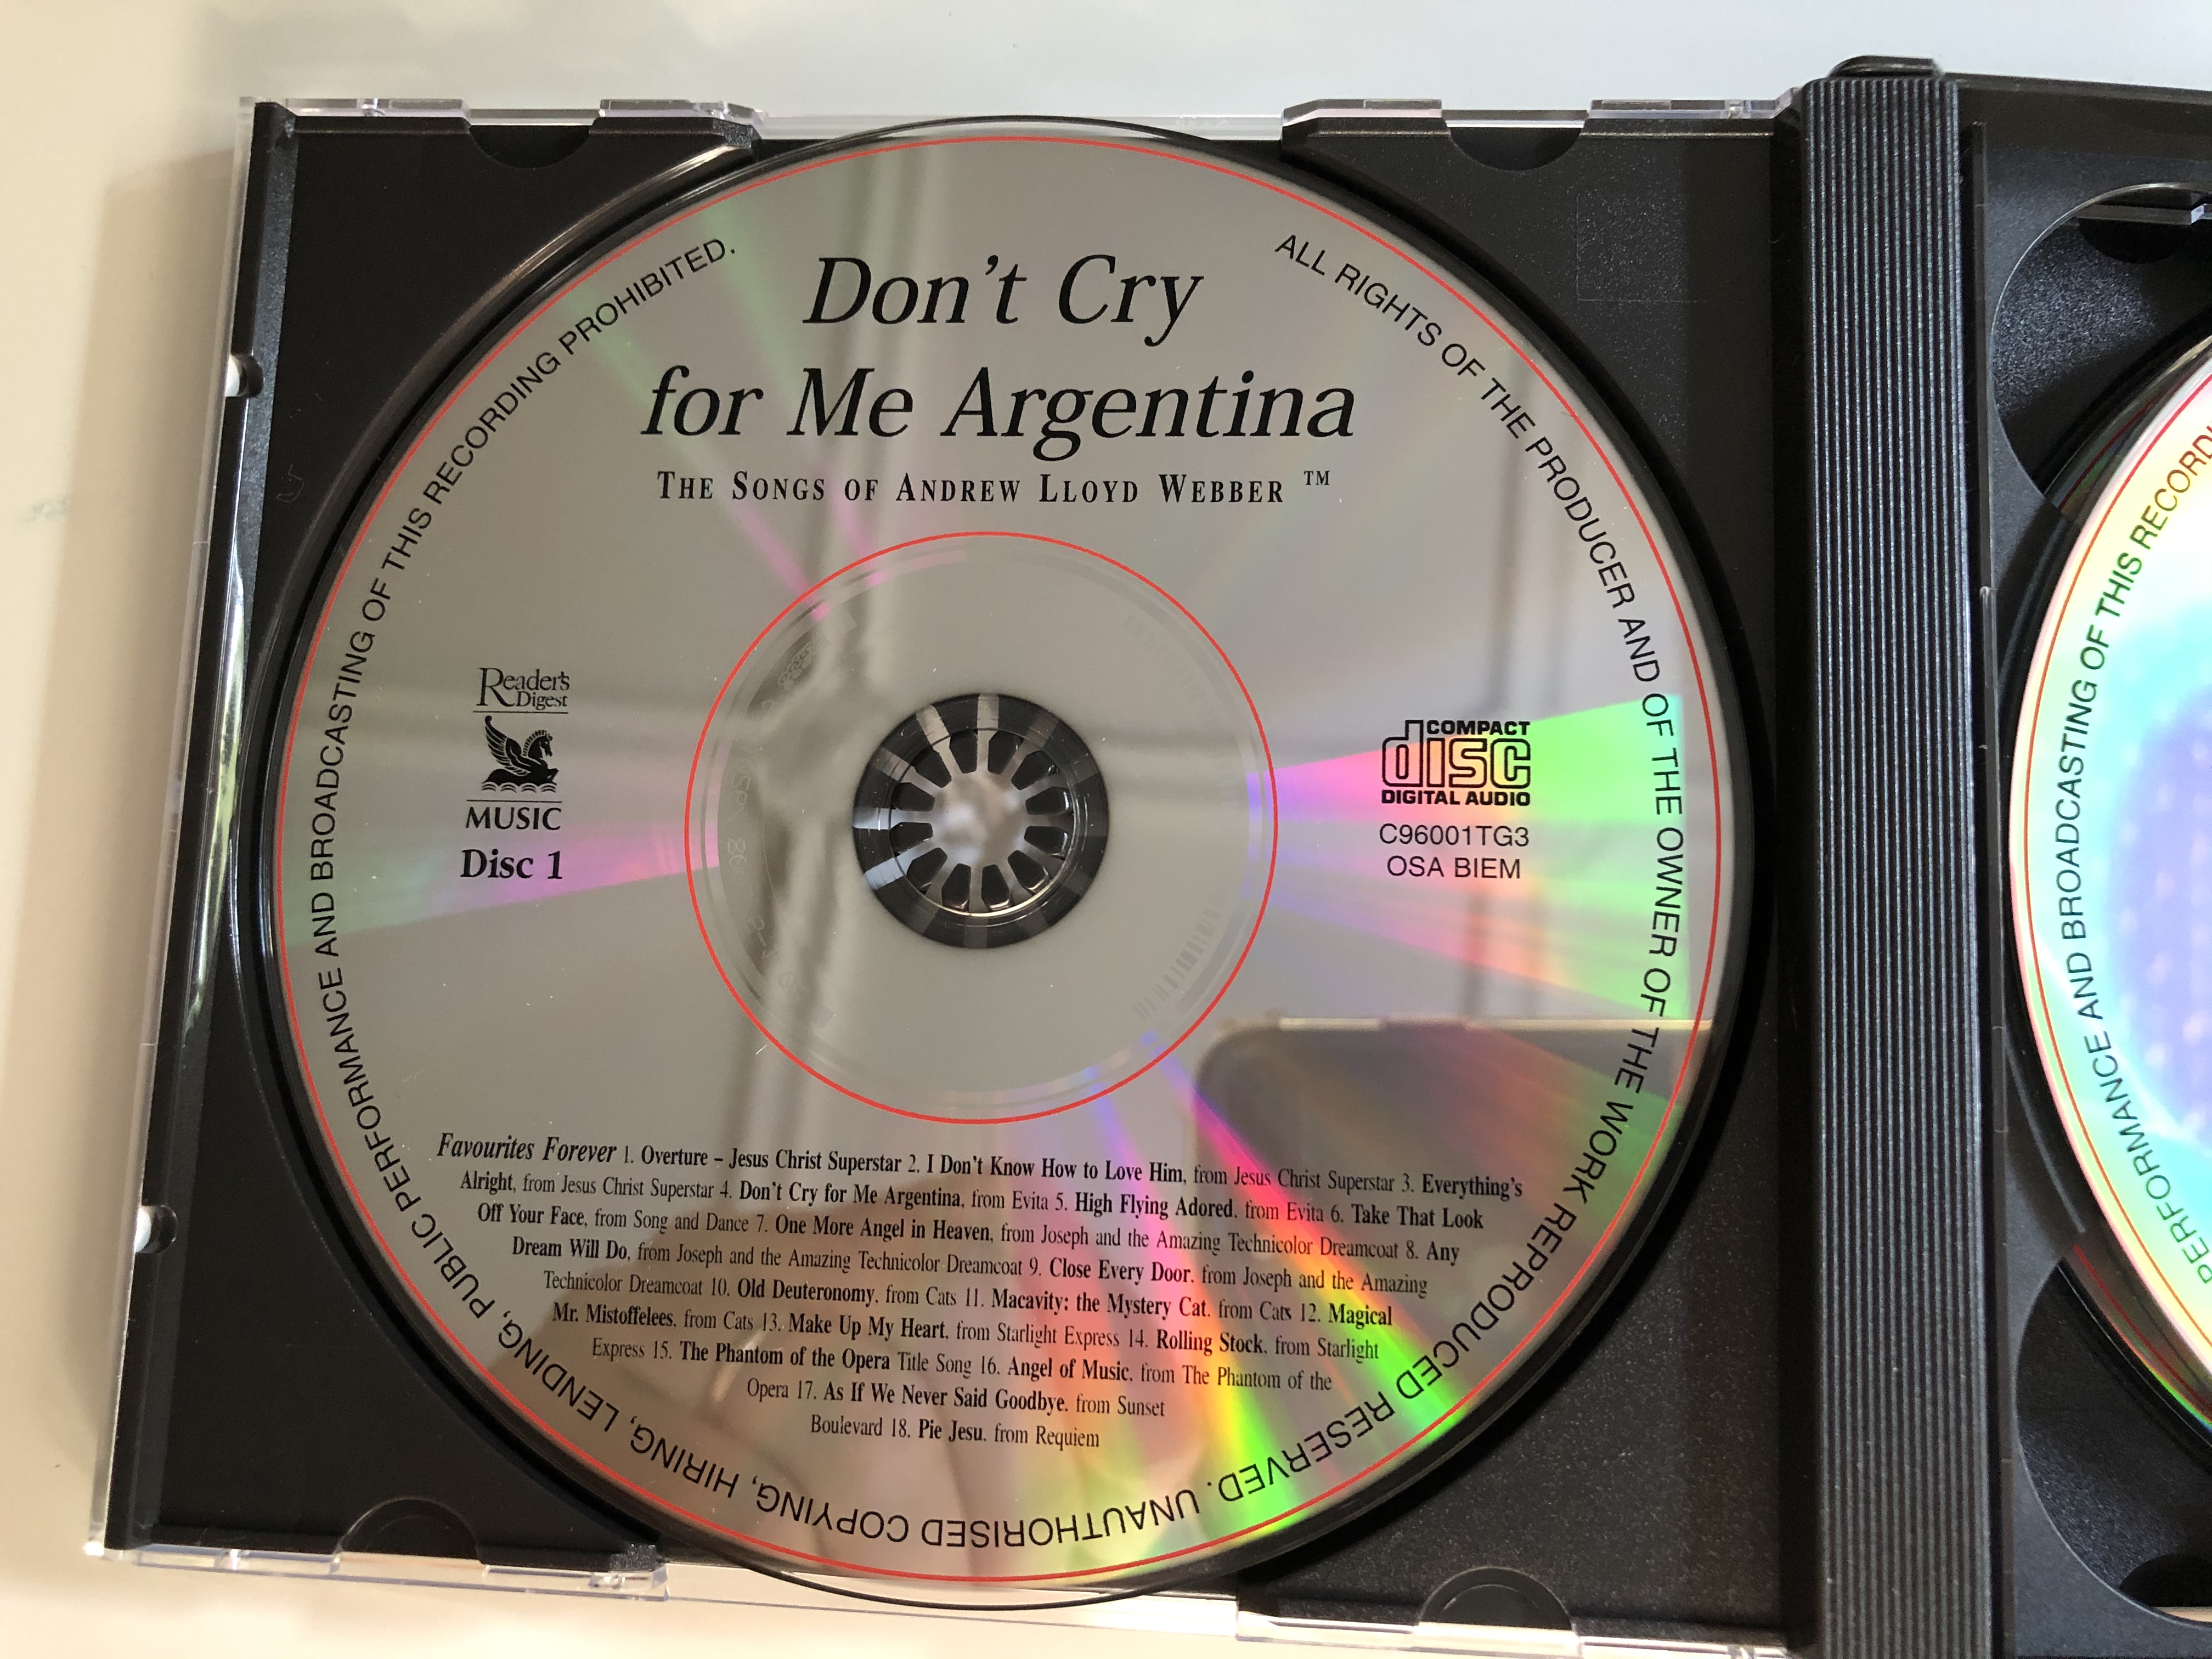 don-t-cry-for-me-argentina-the-songs-of-andrew-lloyd-webber-evita-jesus-christ-superstar-cats-starlight-express-the-phantom-of-the-opera-sunset-boulevard-reader-s-digest-3x-audio-cd-c96.jpg